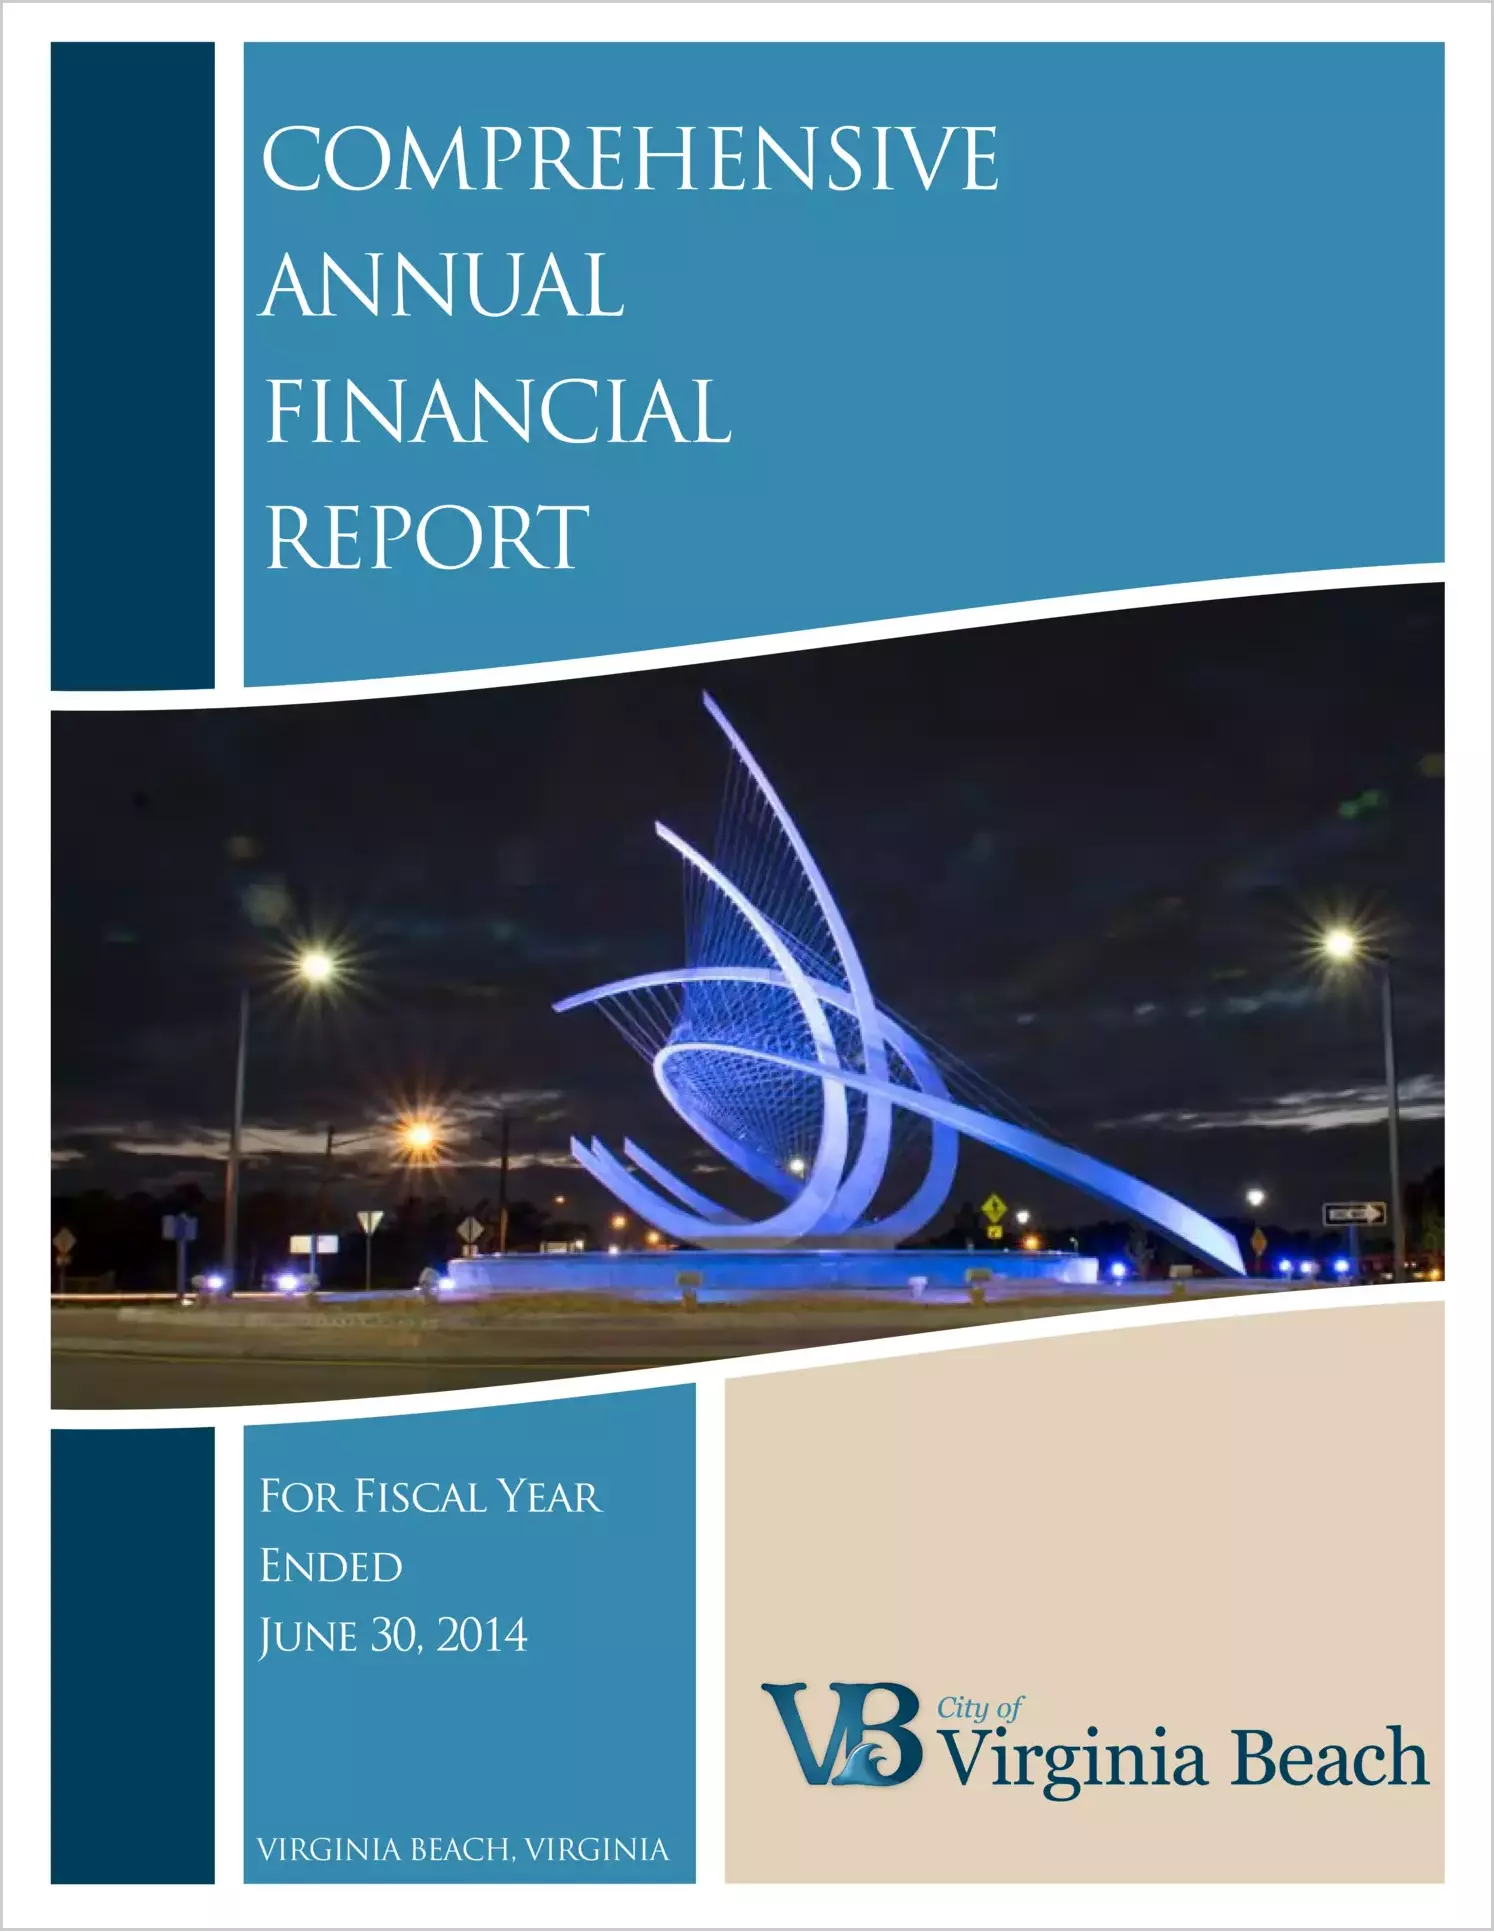 2014 Annual Financial Report for City of Virginia Beach